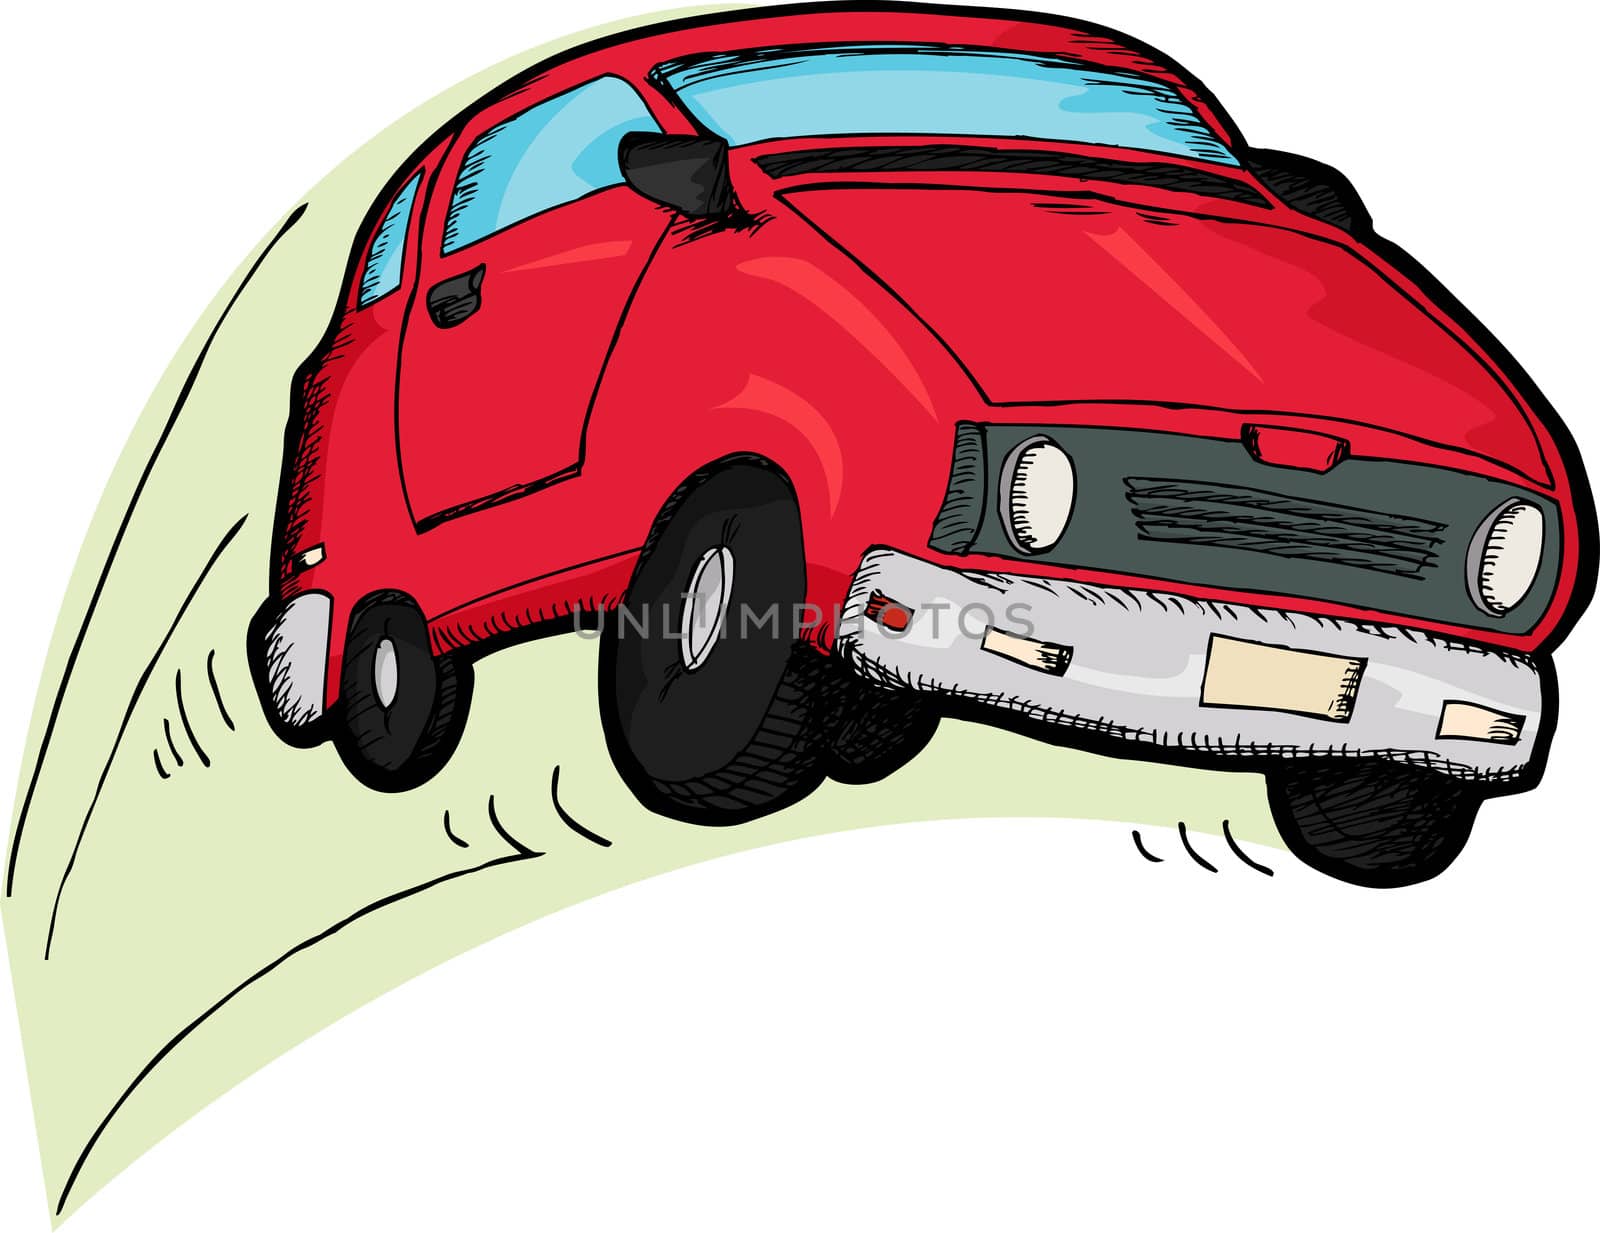 Little red car cartoon bouncing over white background